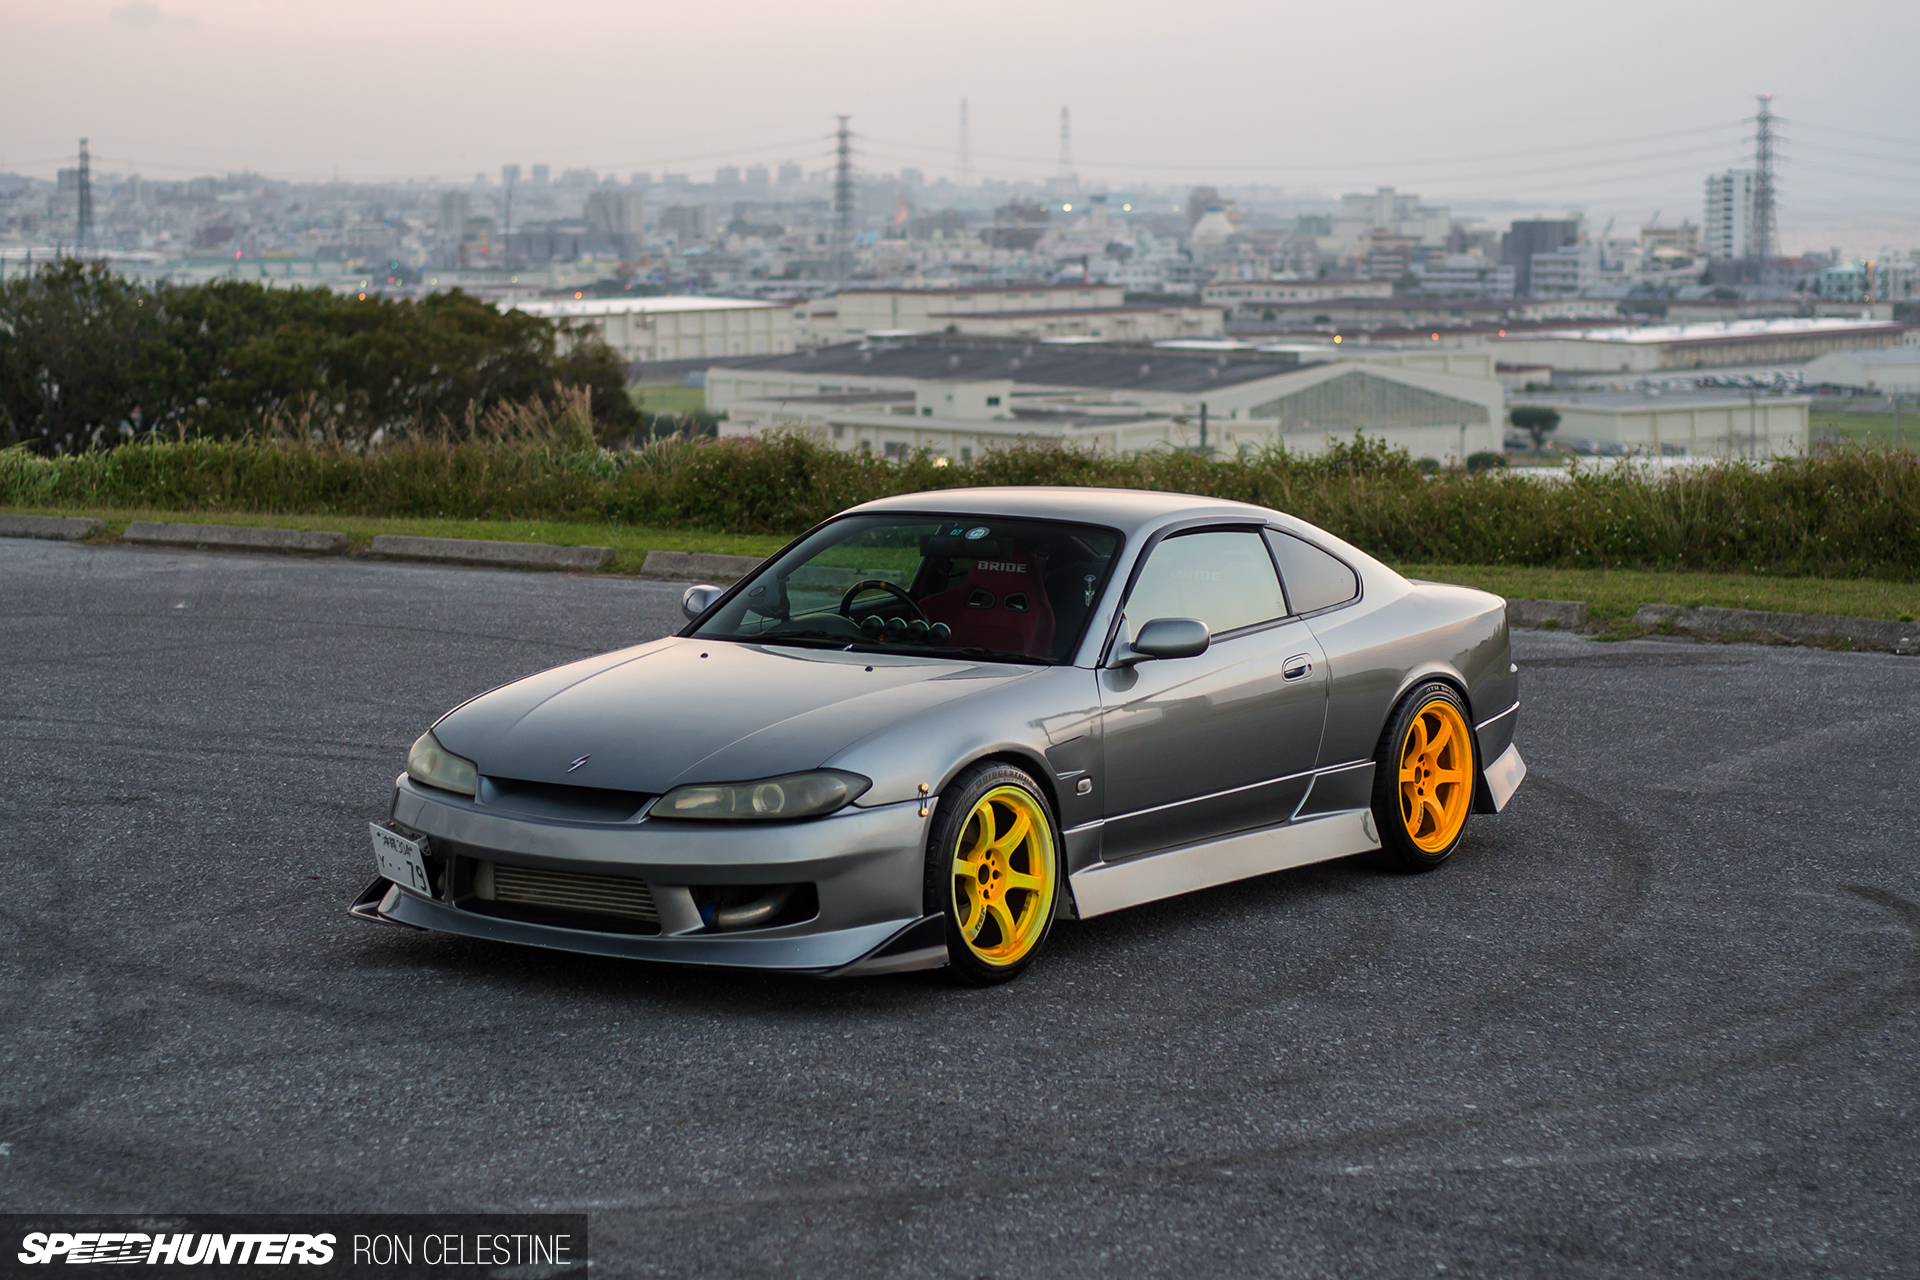 That all led to this Nissan Silvia S15 which he picked up two years ago in ...